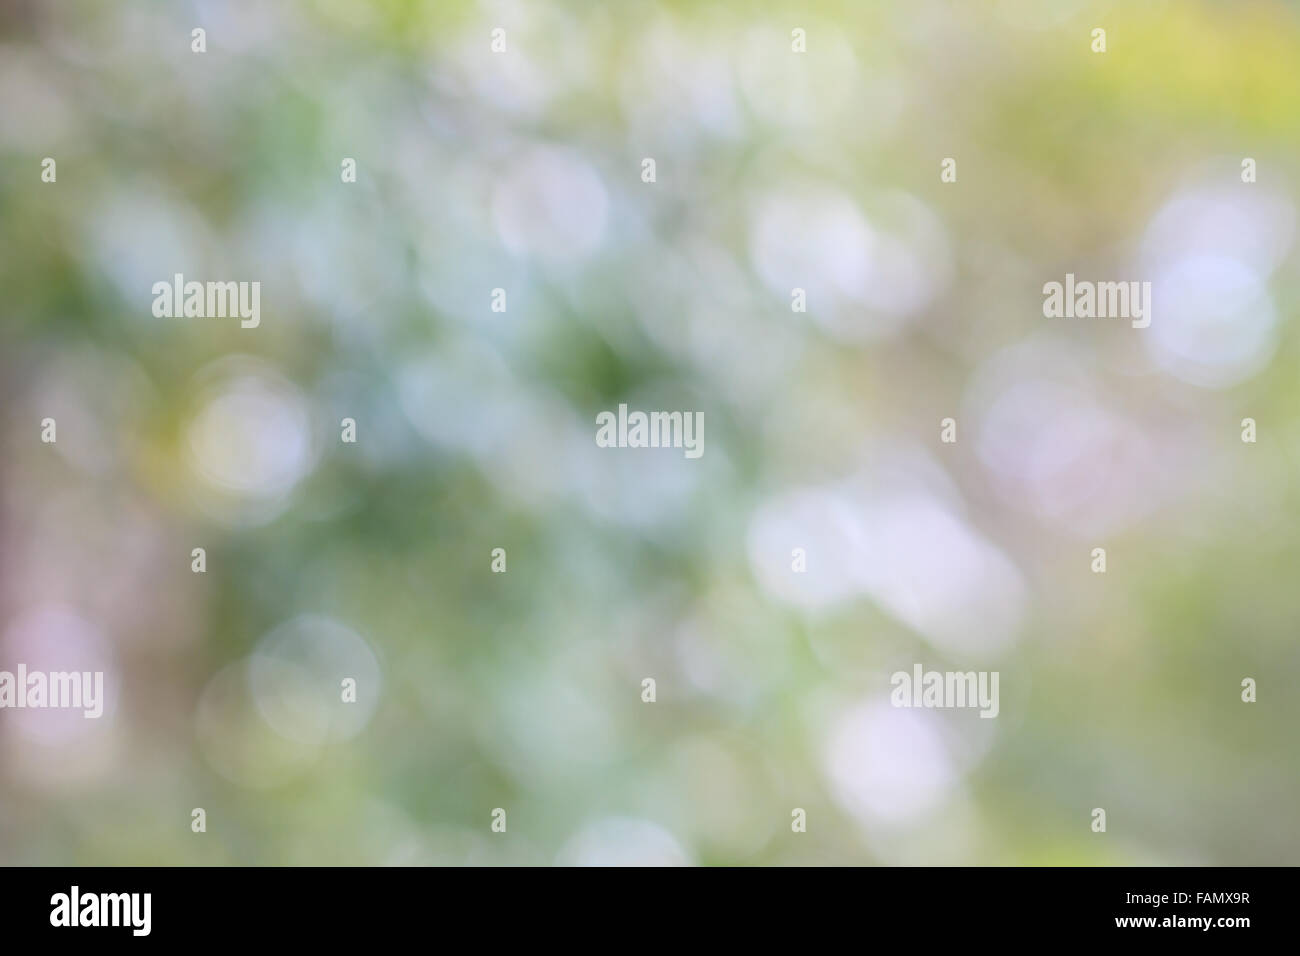 Abstract blurry bokeh background,  use as natural background Stock Photo